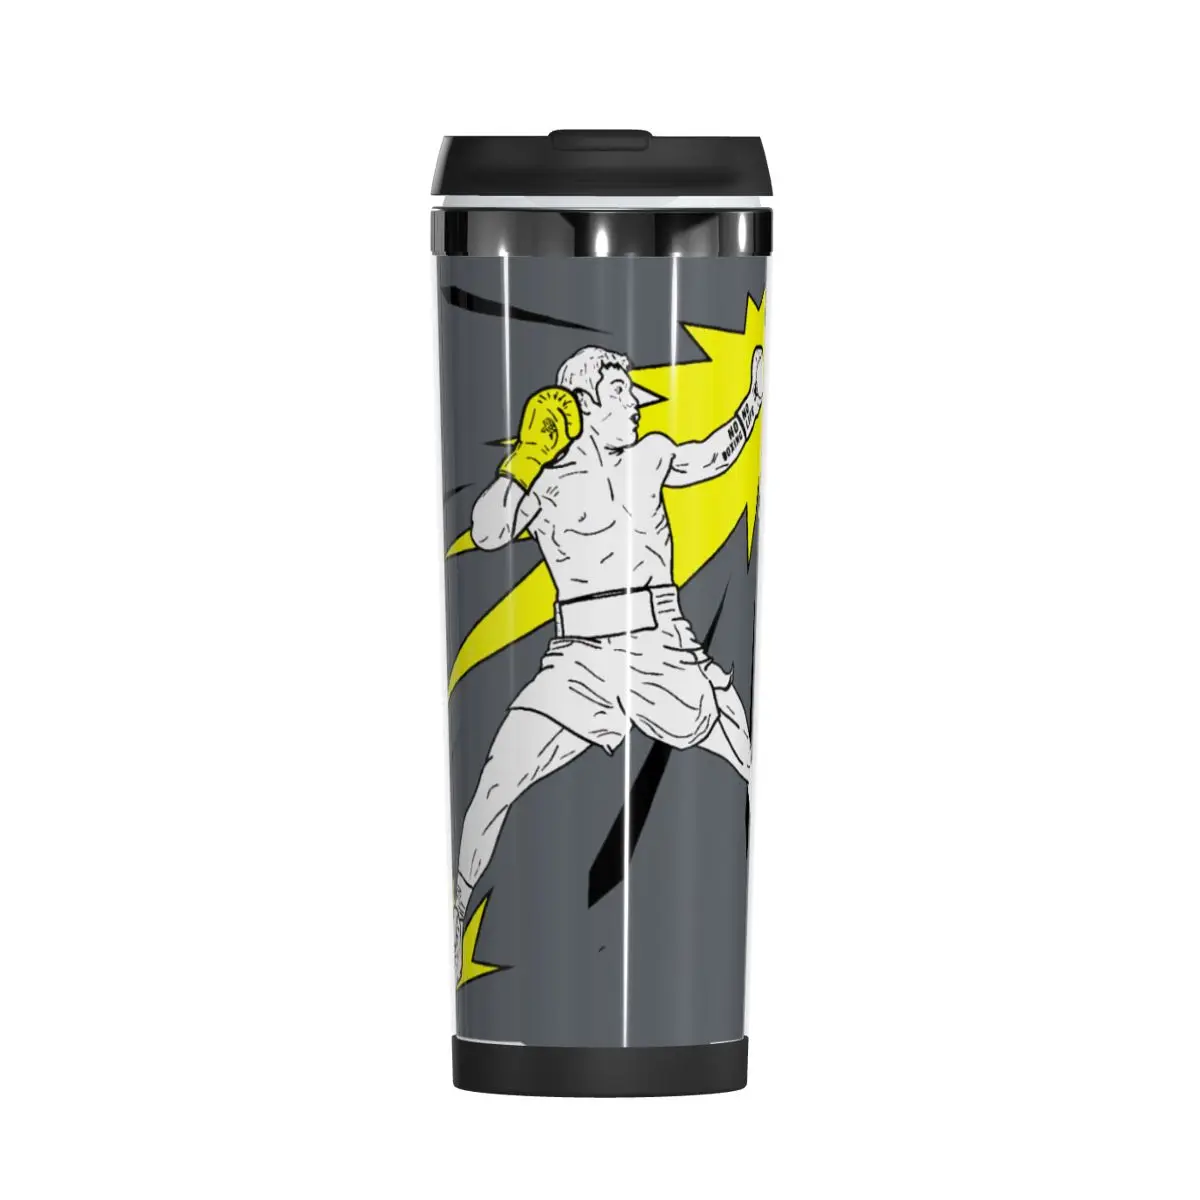 

Saul Canelos Alvarez No Boxing No Life Double Insulated Water Cup Funny Thermos Mug Funny Novelty R257 Heat Insulation beer mugs